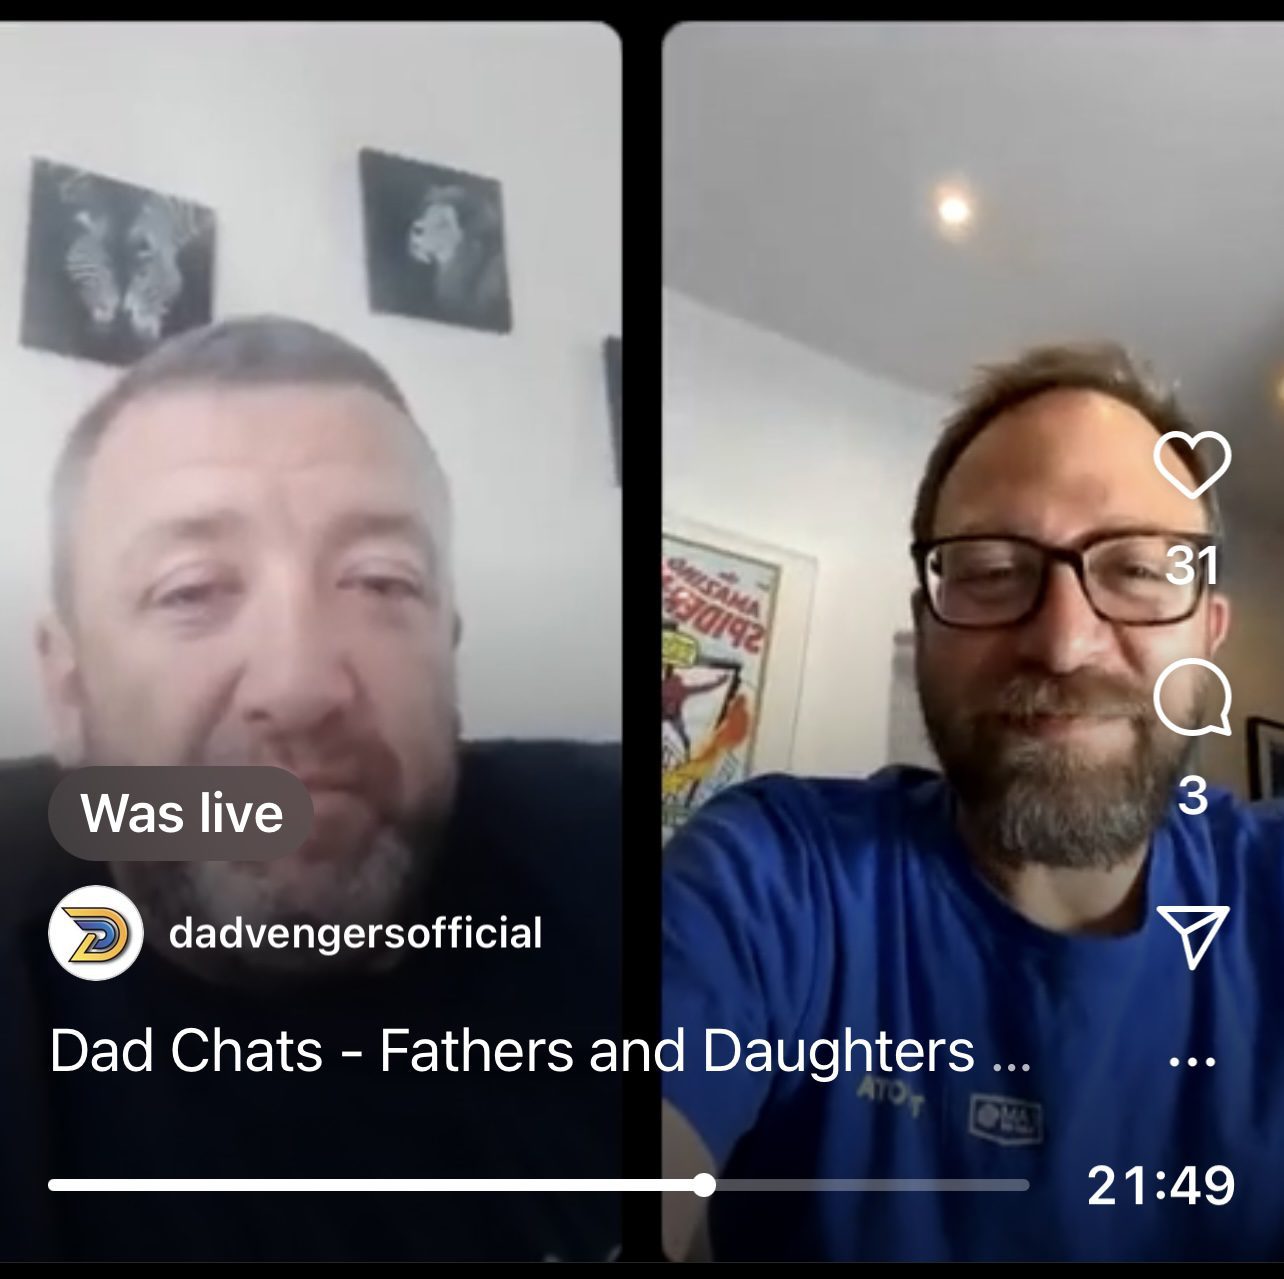 Dadvengers Dad Chats - Fathers and Daughters